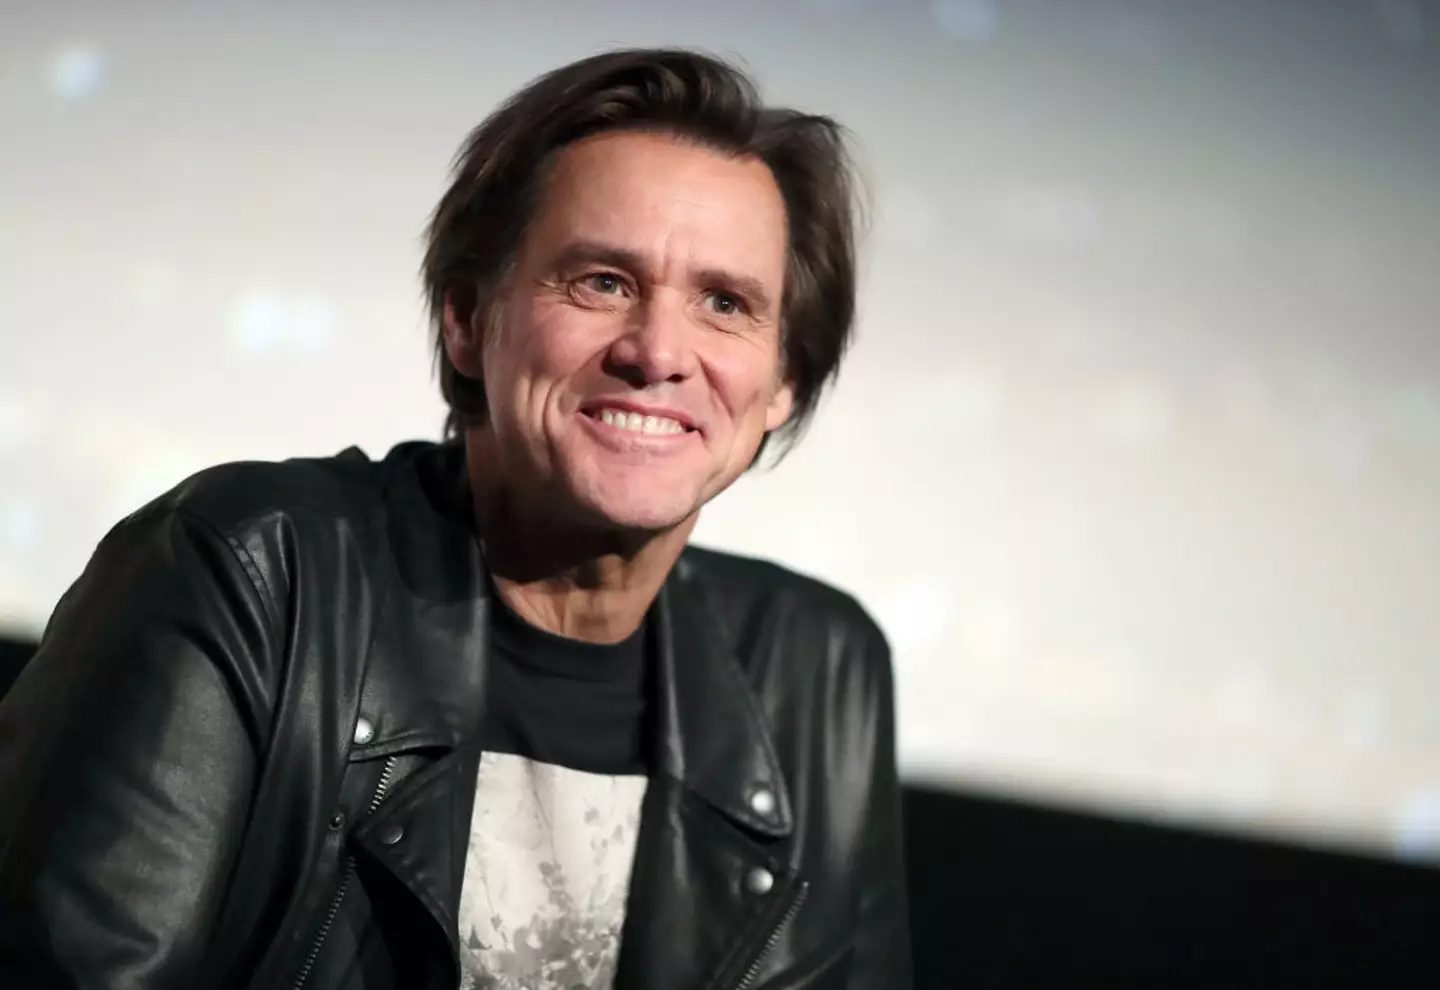 A comedian from New York has been inundated with messages due to her uncanny resemblance to actor Jim Carrey.